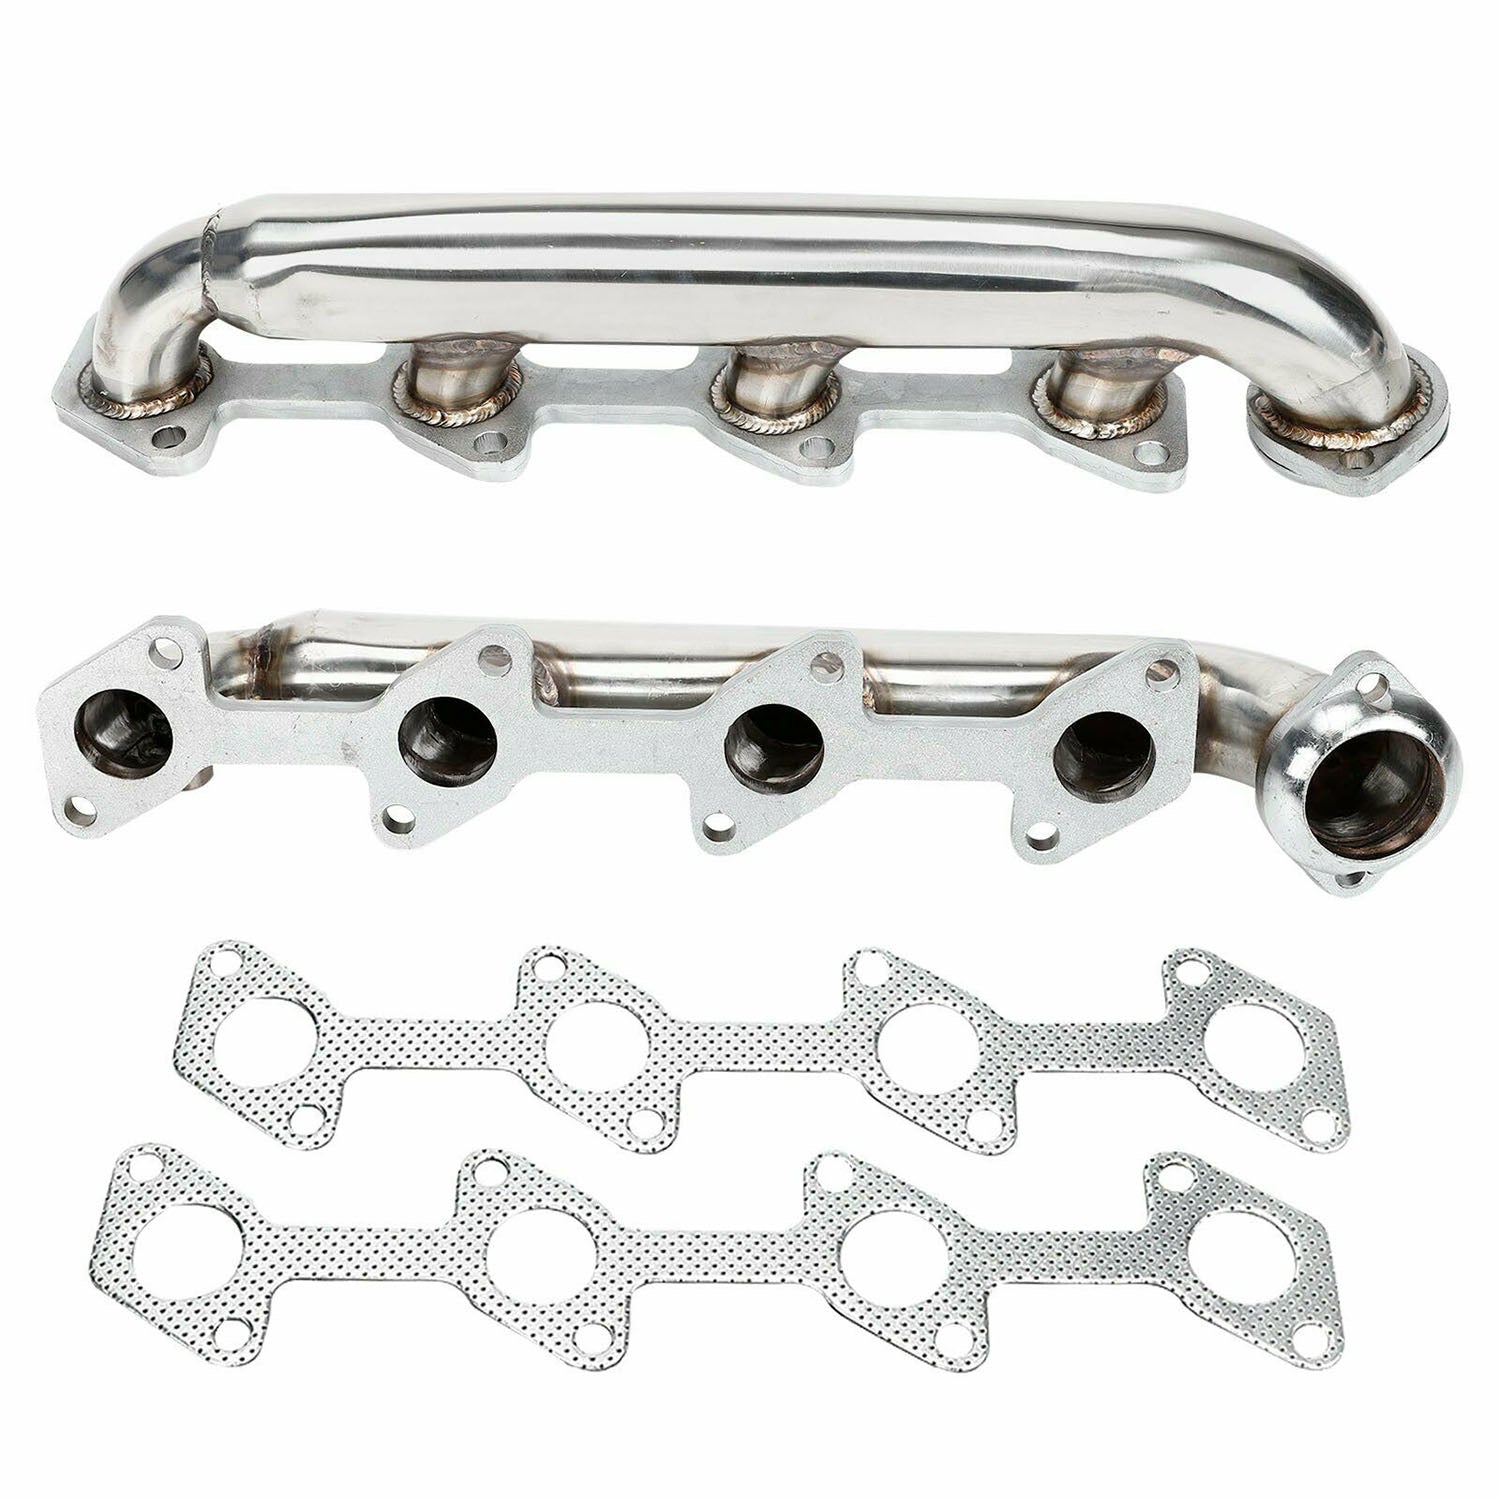 Exhaust Manifold Header for 2003-2007 6.0L Powerstroke Ford F250 F350